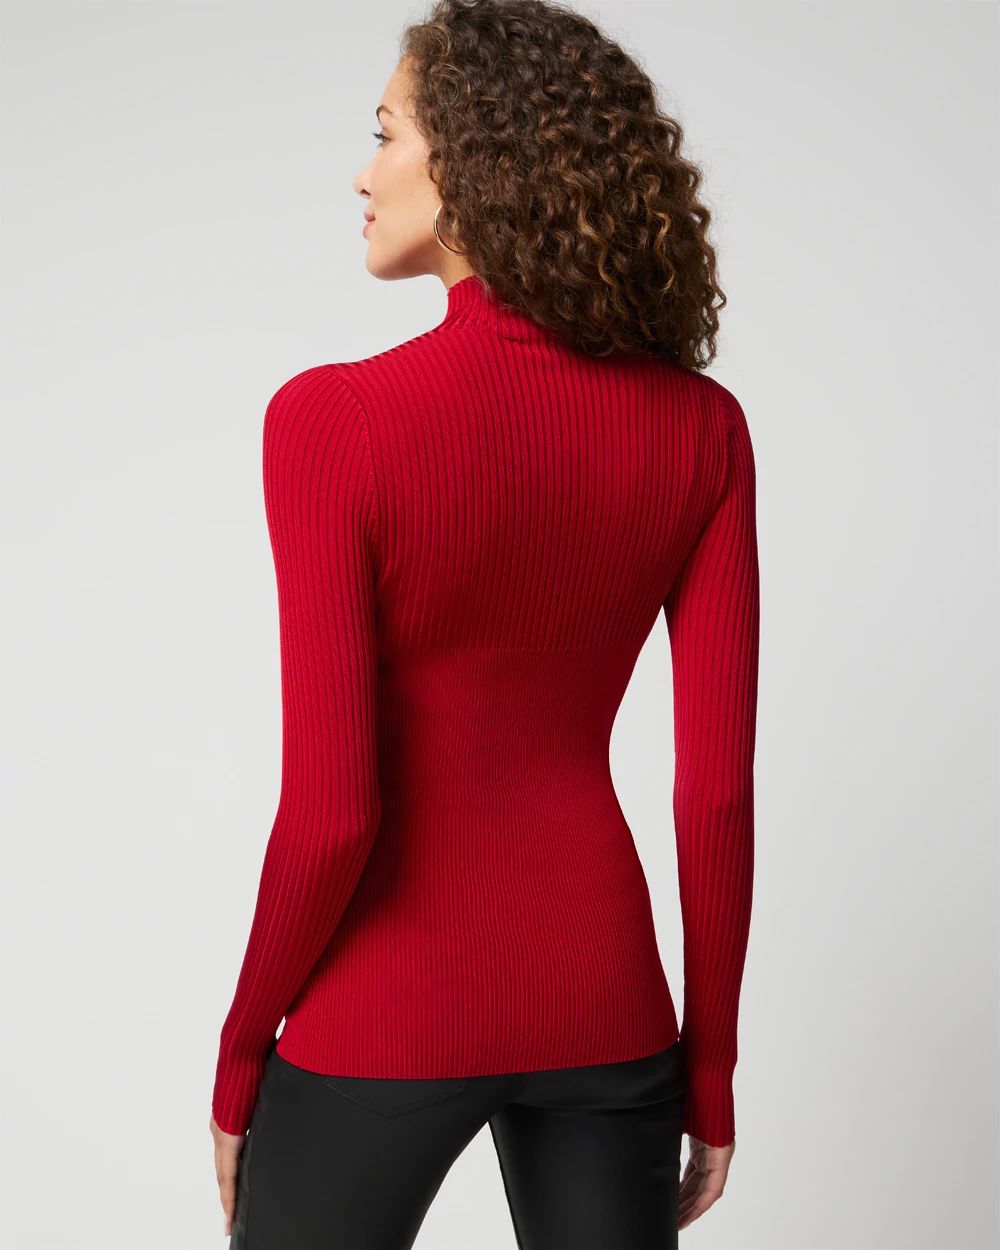 Long Sleeve Cutout Mockneck Top click to view larger image.